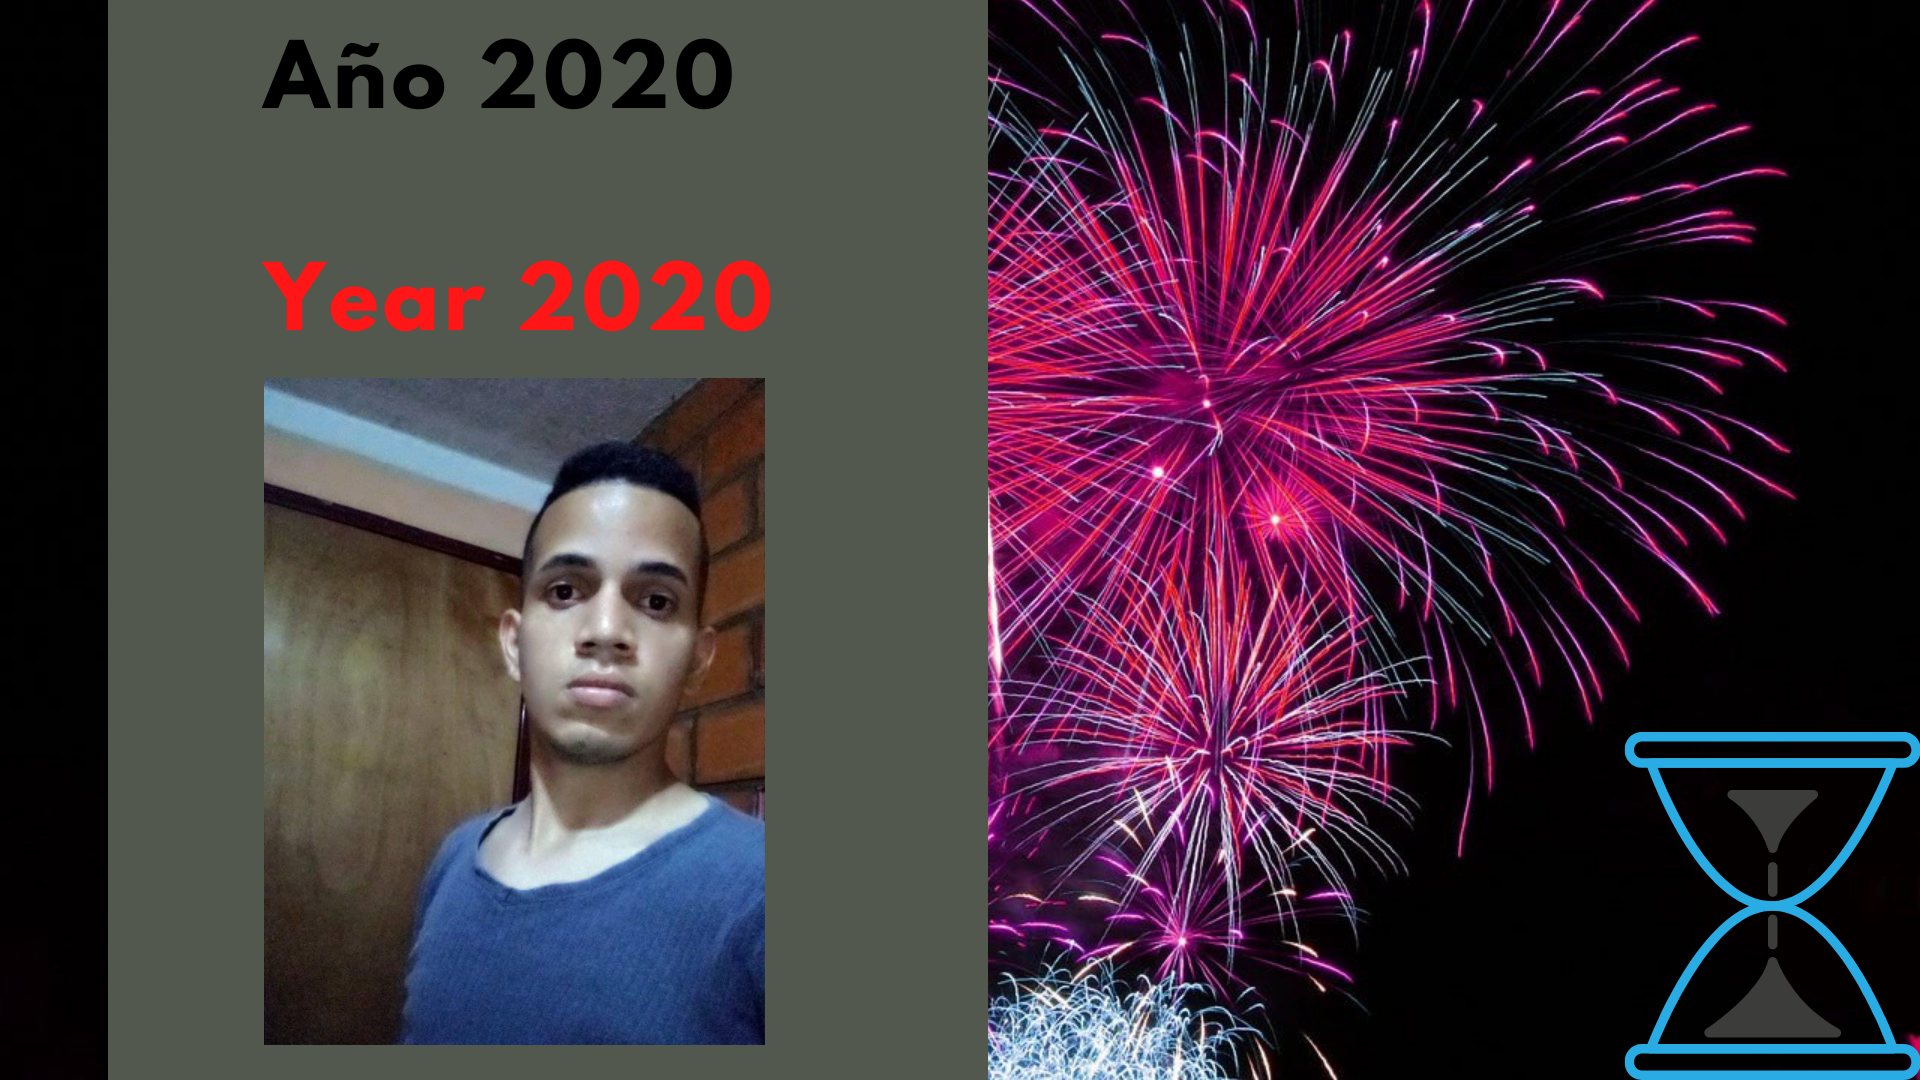 Año 2020 Year 2020.png